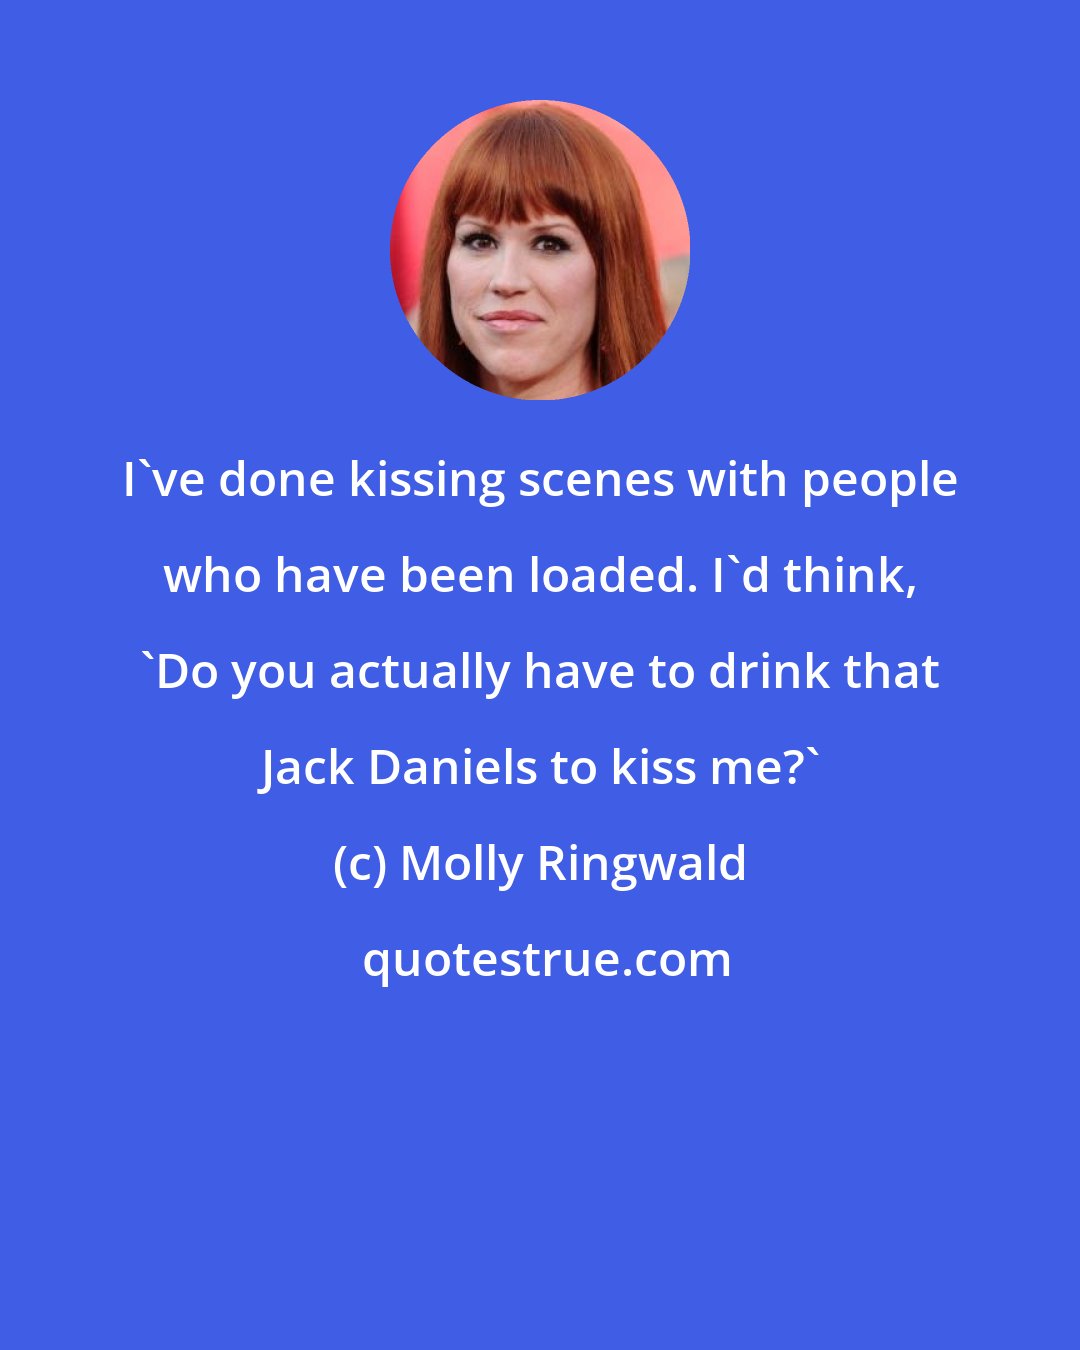 Molly Ringwald: I've done kissing scenes with people who have been loaded. I'd think, 'Do you actually have to drink that Jack Daniels to kiss me?'